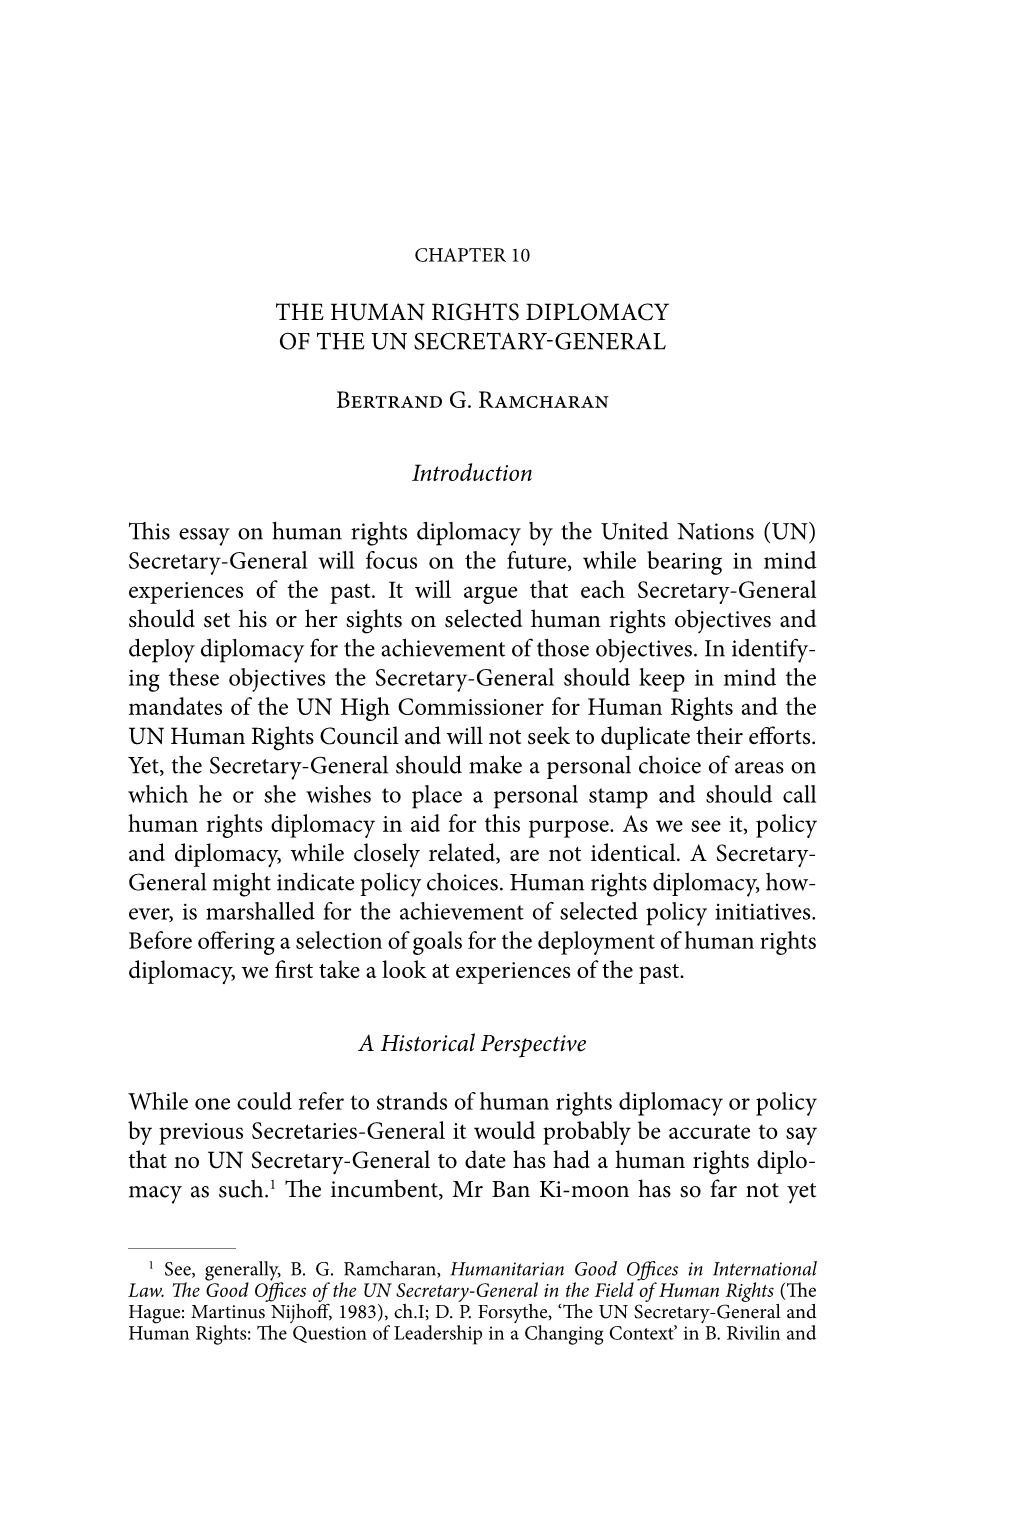 The Human Rights Diplomacy of the Un SecretaryGeneral